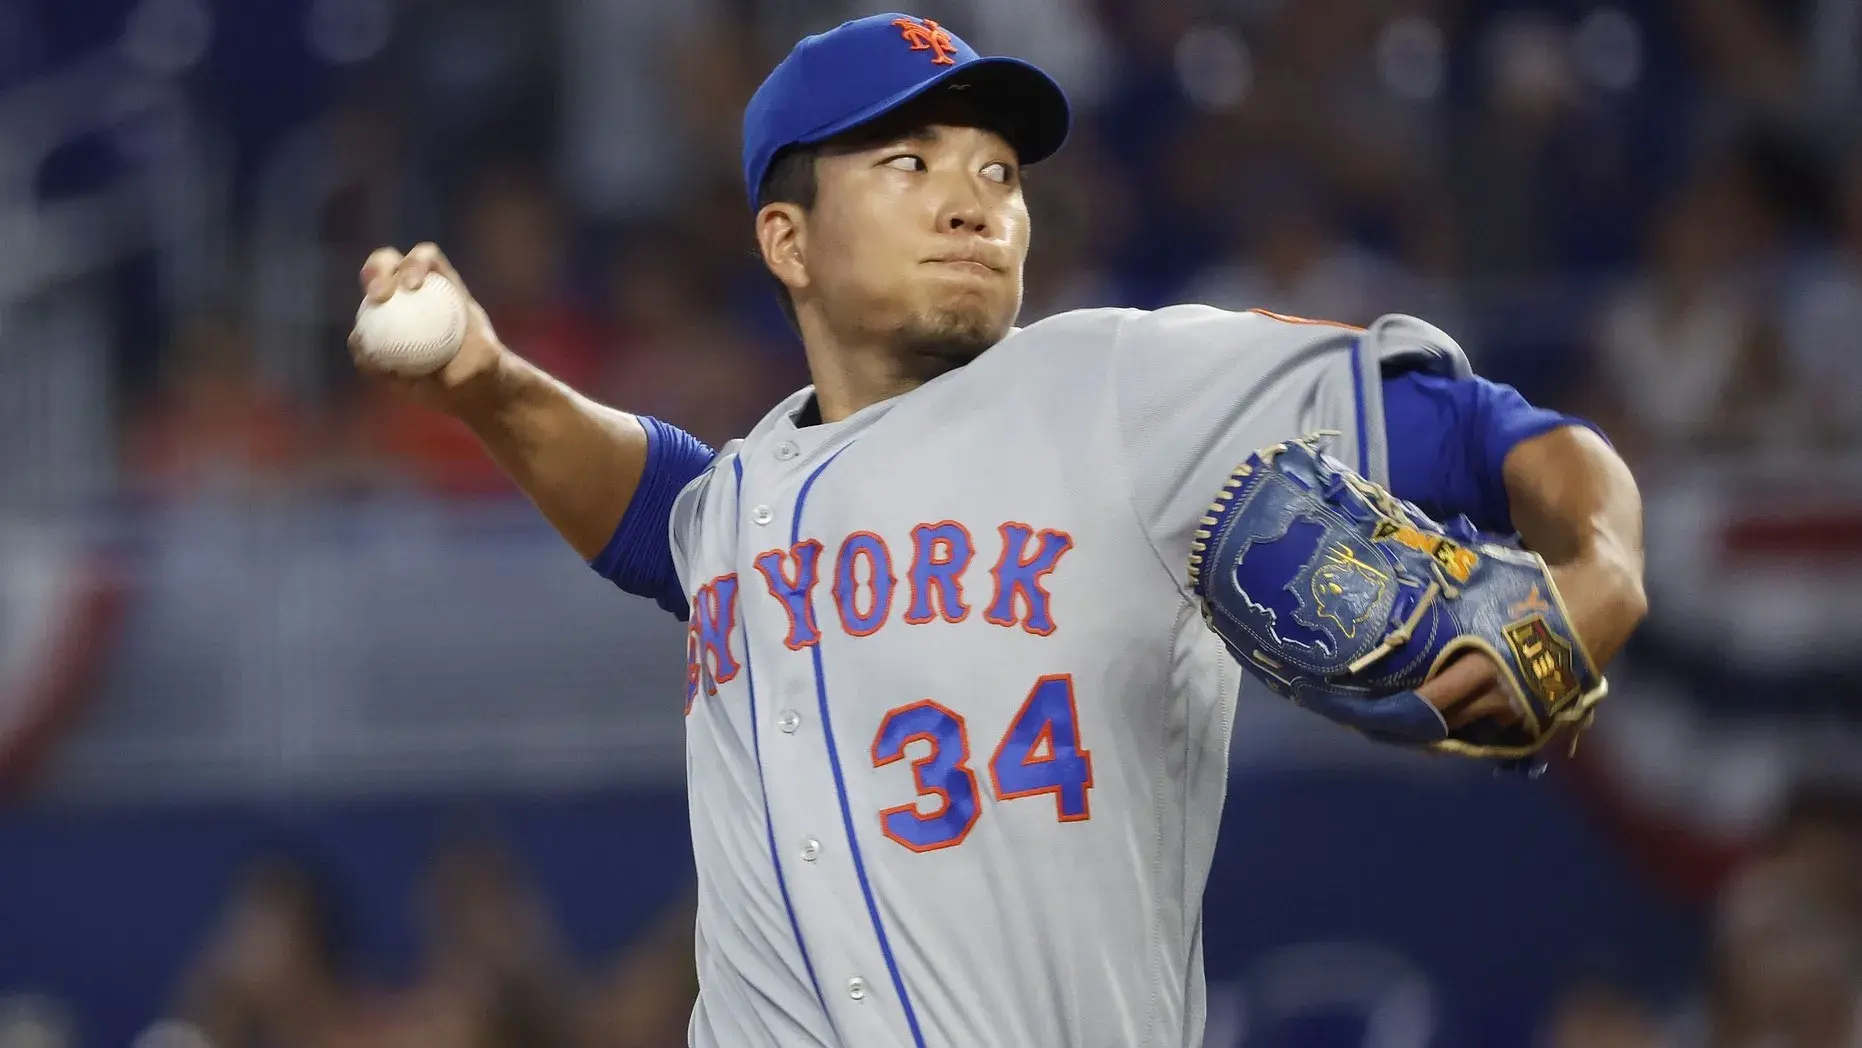 Apr 2, 2023; Miami, Florida, USA; New York Mets starting pitcher Kodai Senga (34) pitches against the Miami Marlins in the first inning at loanDepot Park. / Rhona Wise-USA TODAY Sports